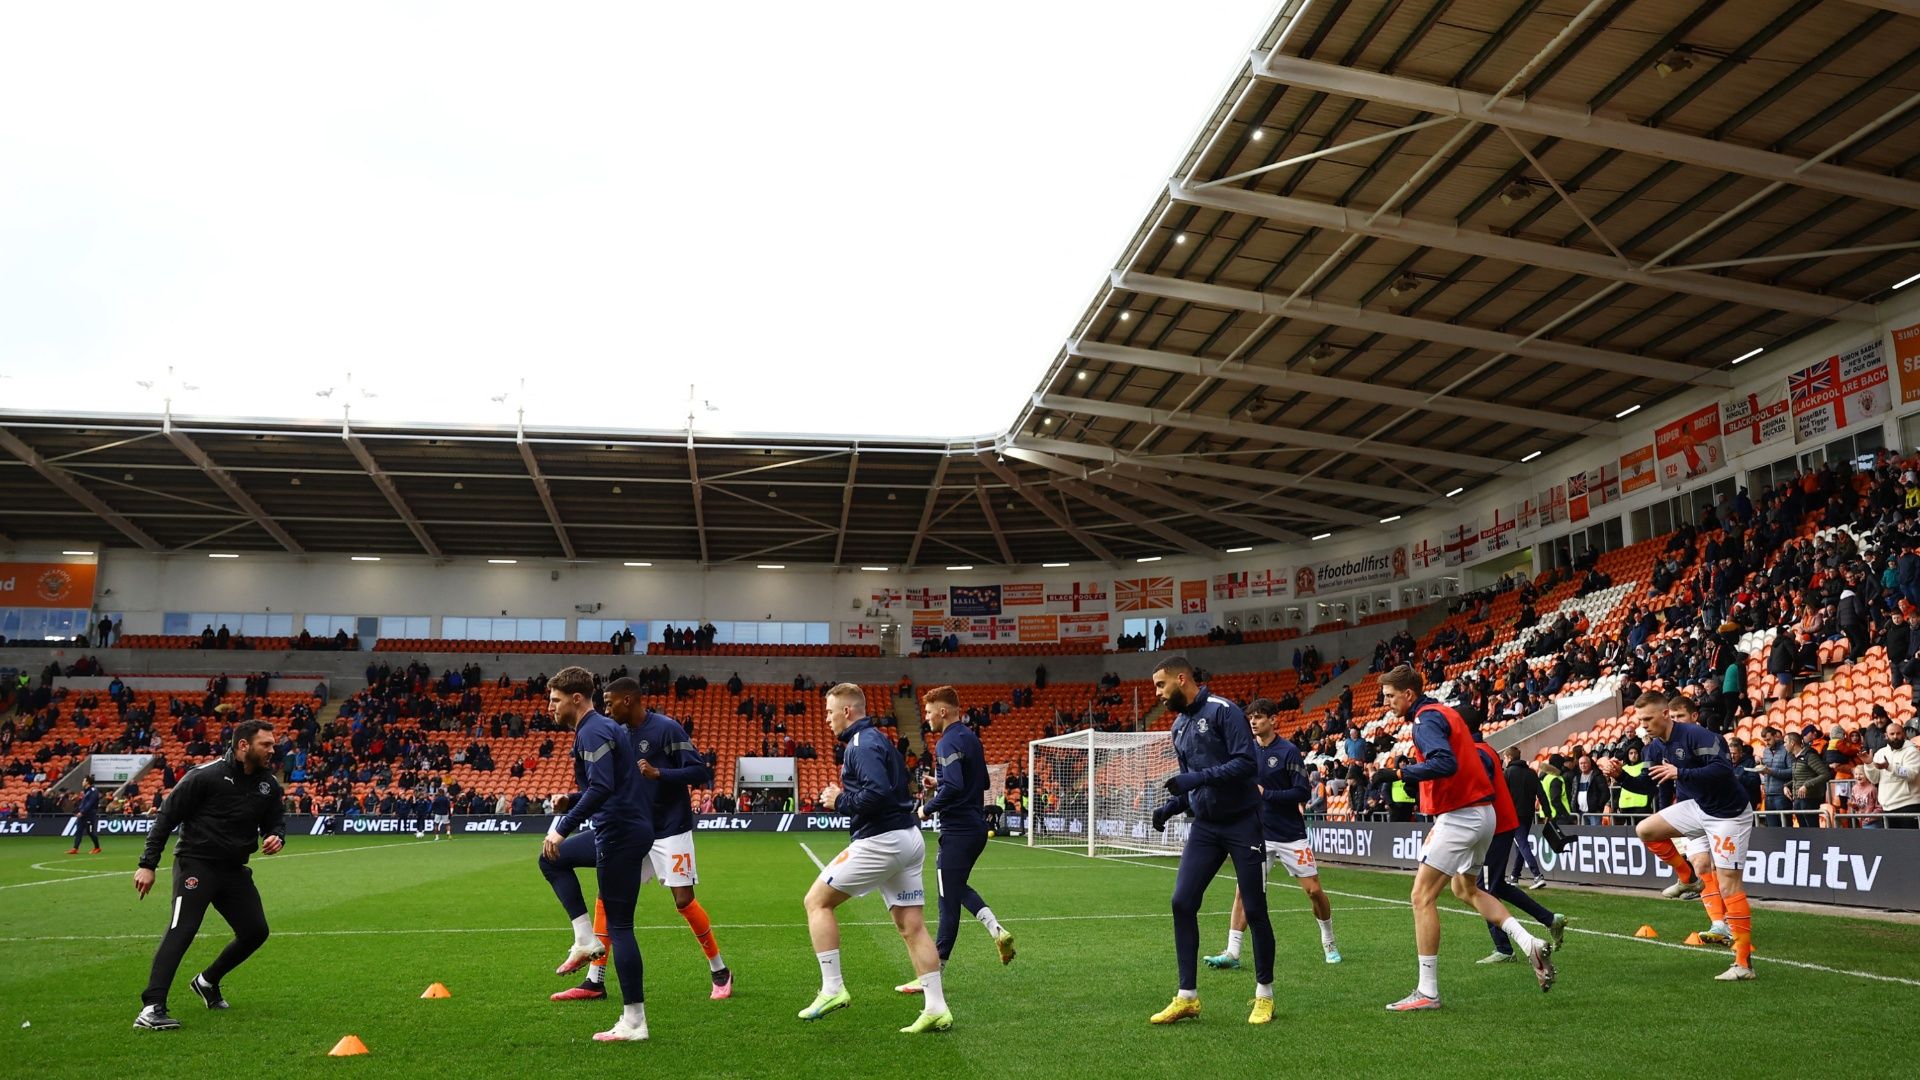 What is Bloomfield Road’s capacity? All you need to know about the home of Blackpool